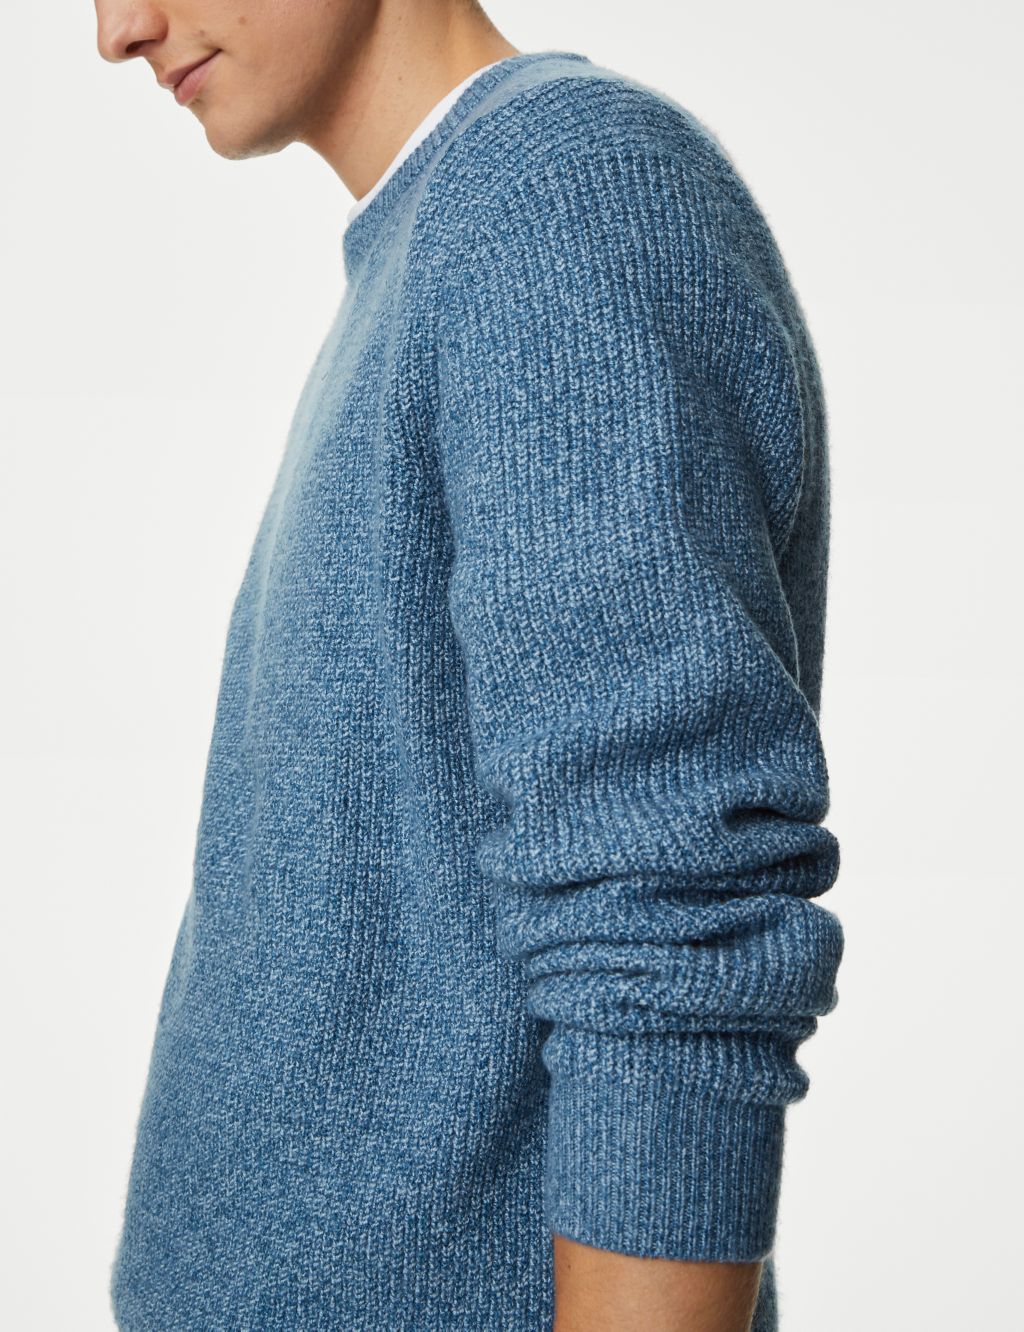 Supersoft Chunky Crew Neck Jumper image 4